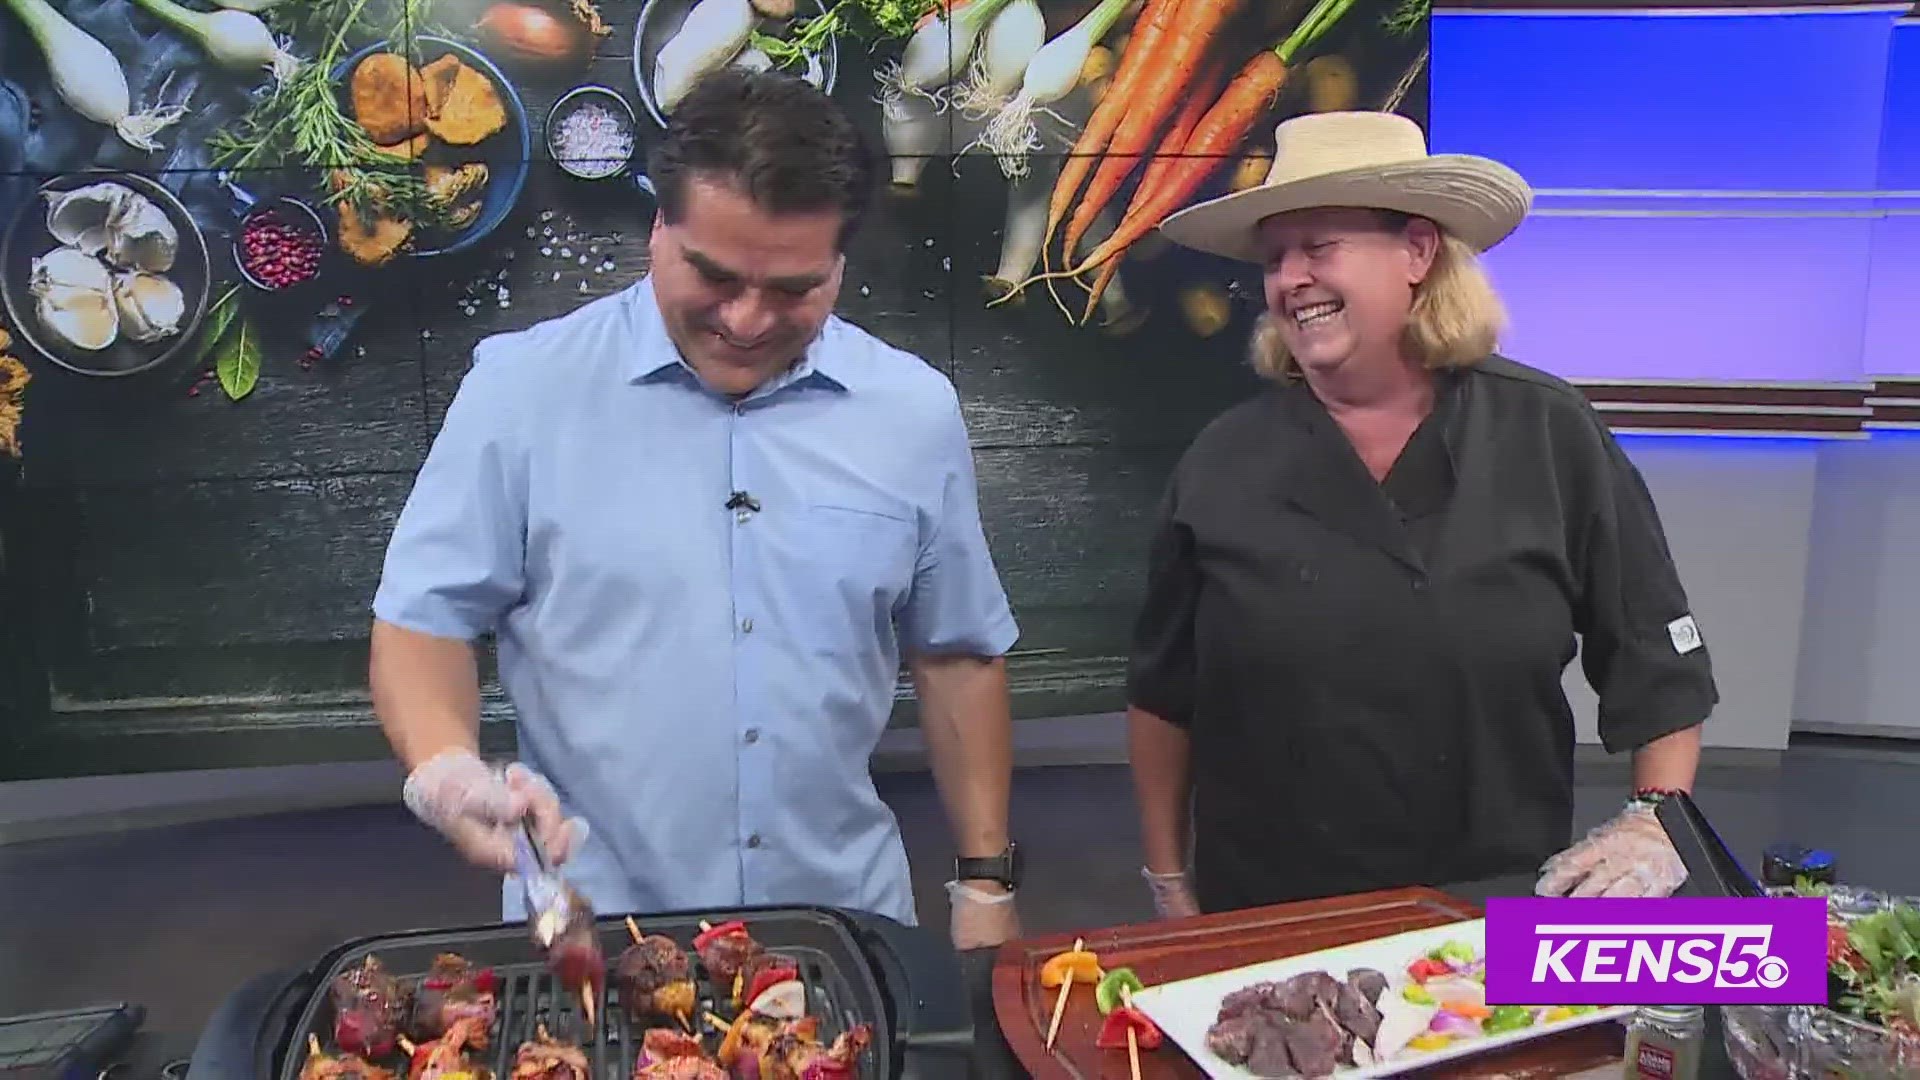 The Modern Chili Queen of Texas, Chef Diana Anderson, stops by the studio to help Paul "chilify" some kebab skewers.